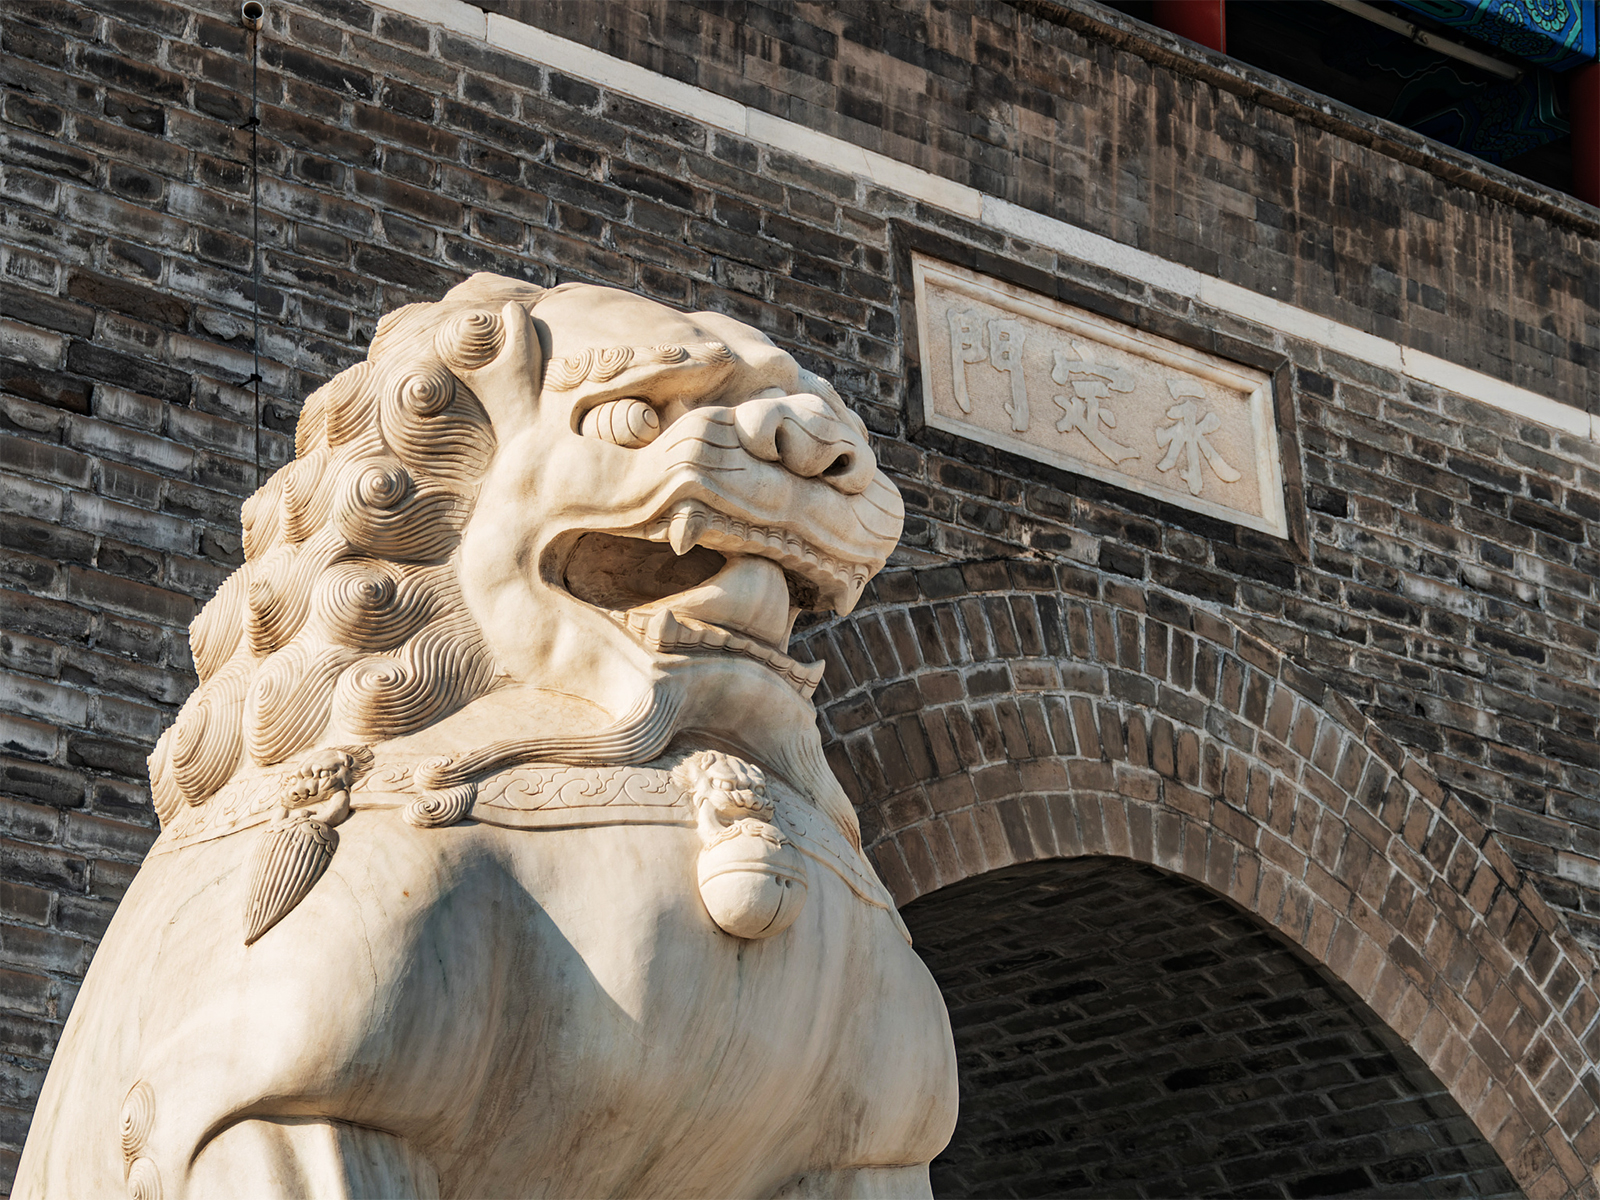 A file photos shows the Yongding Gate at the southern end of the Beijing Central Axis. /CFP